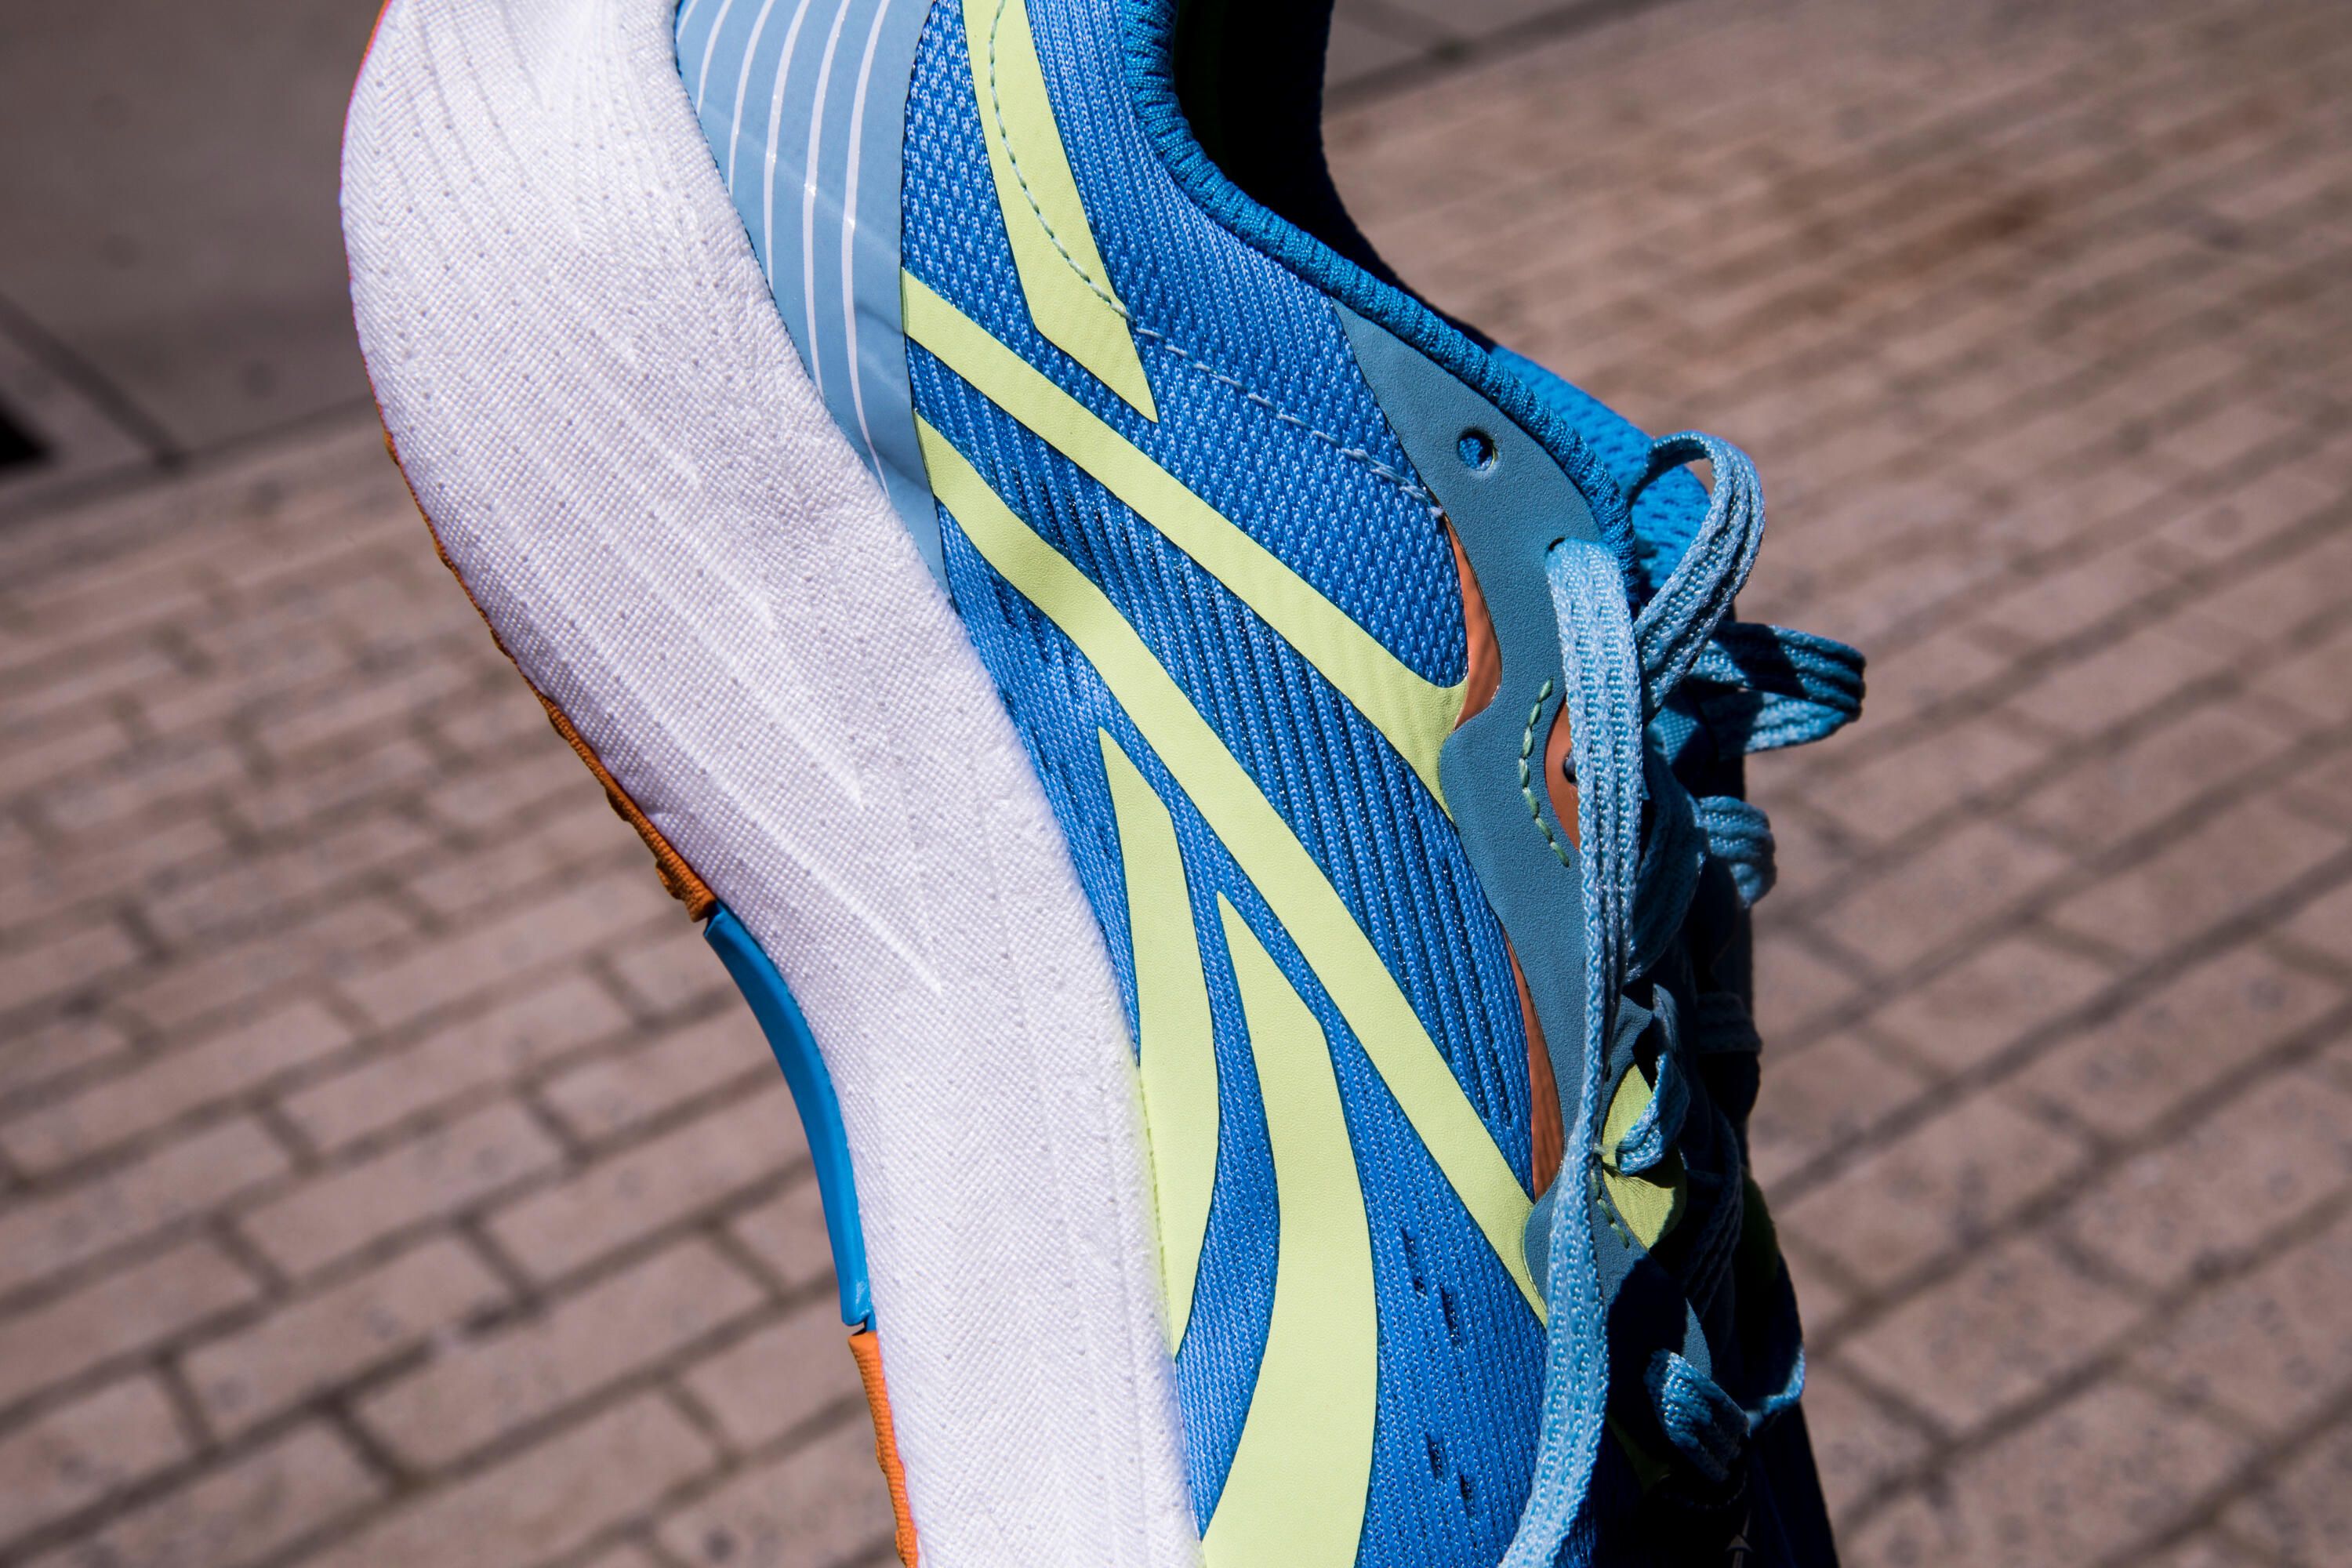 Tested and Reviewed: Reebok 5 Floatride Energy